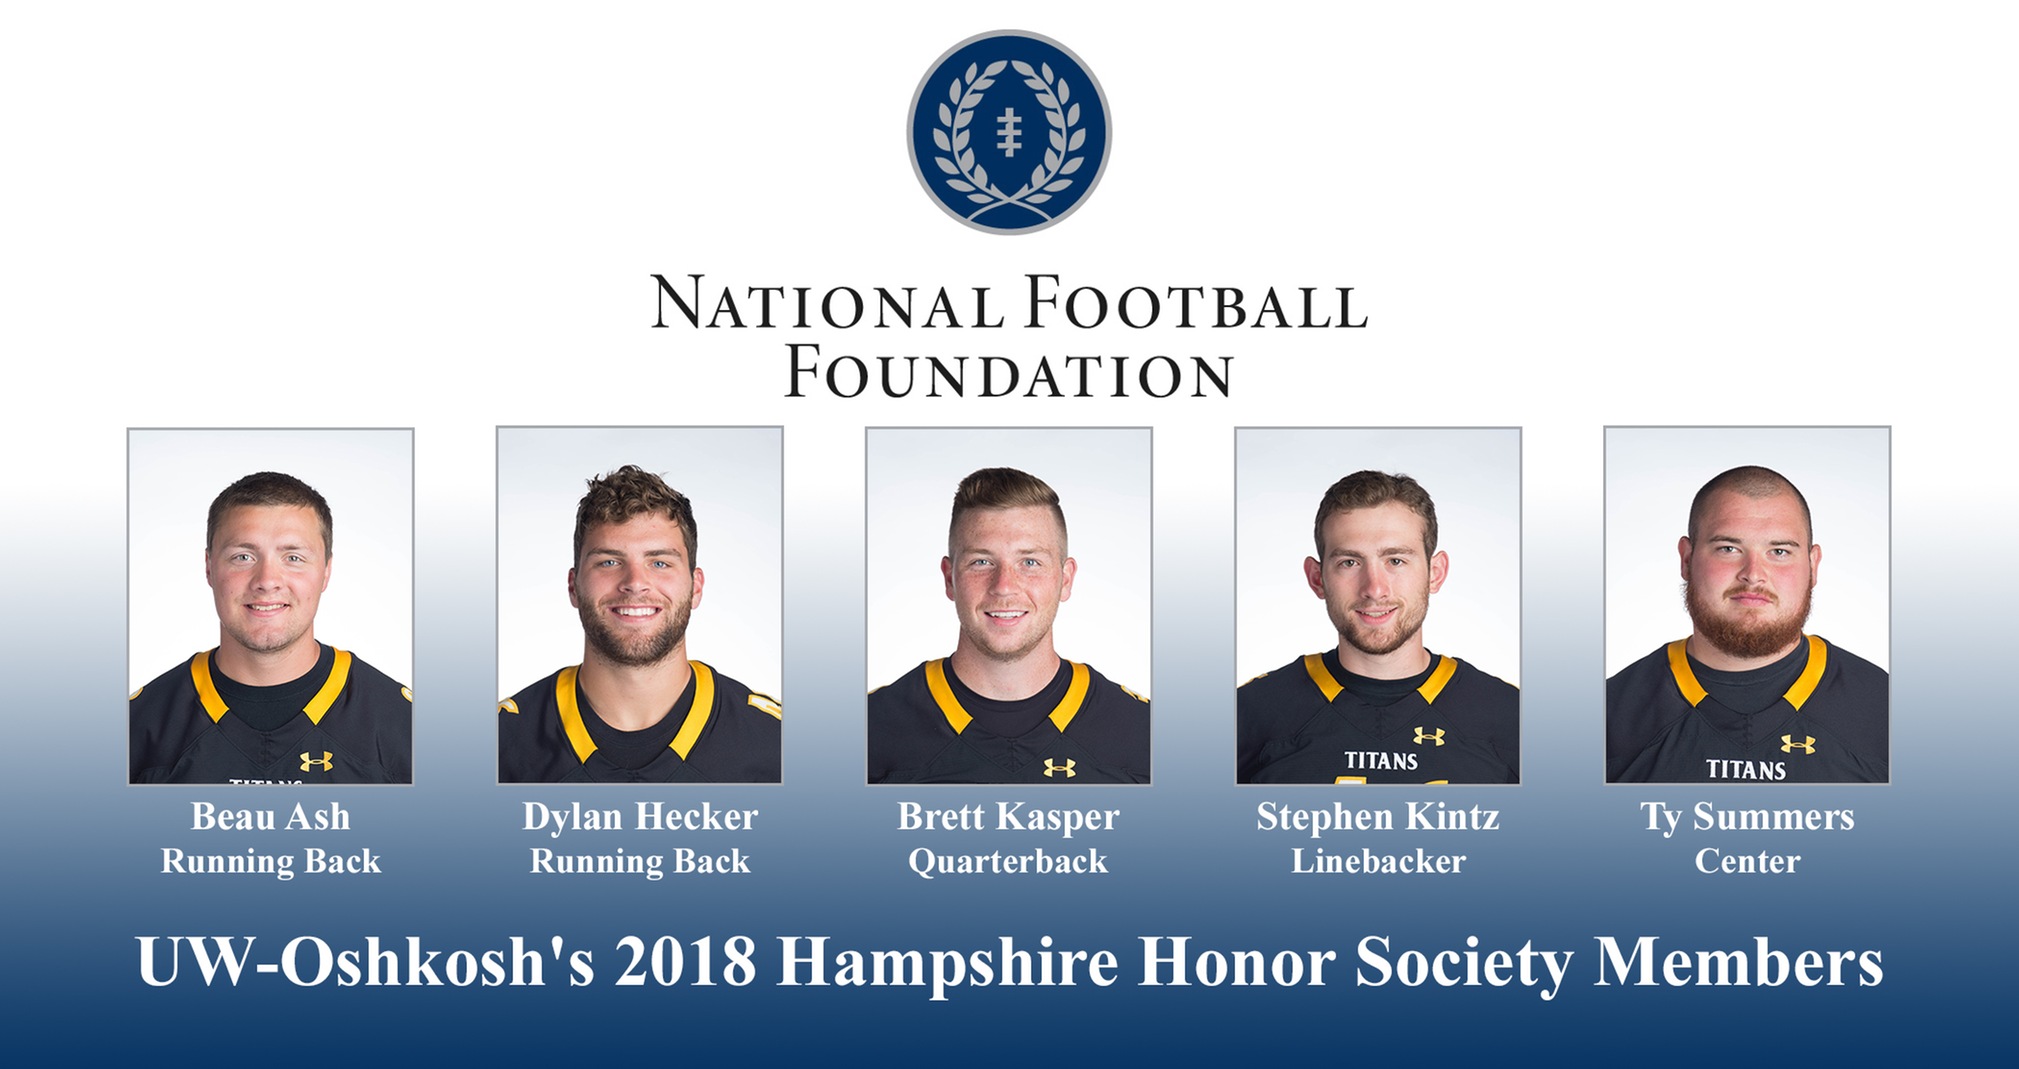 Five Titans Named To Hampshire Honor Society